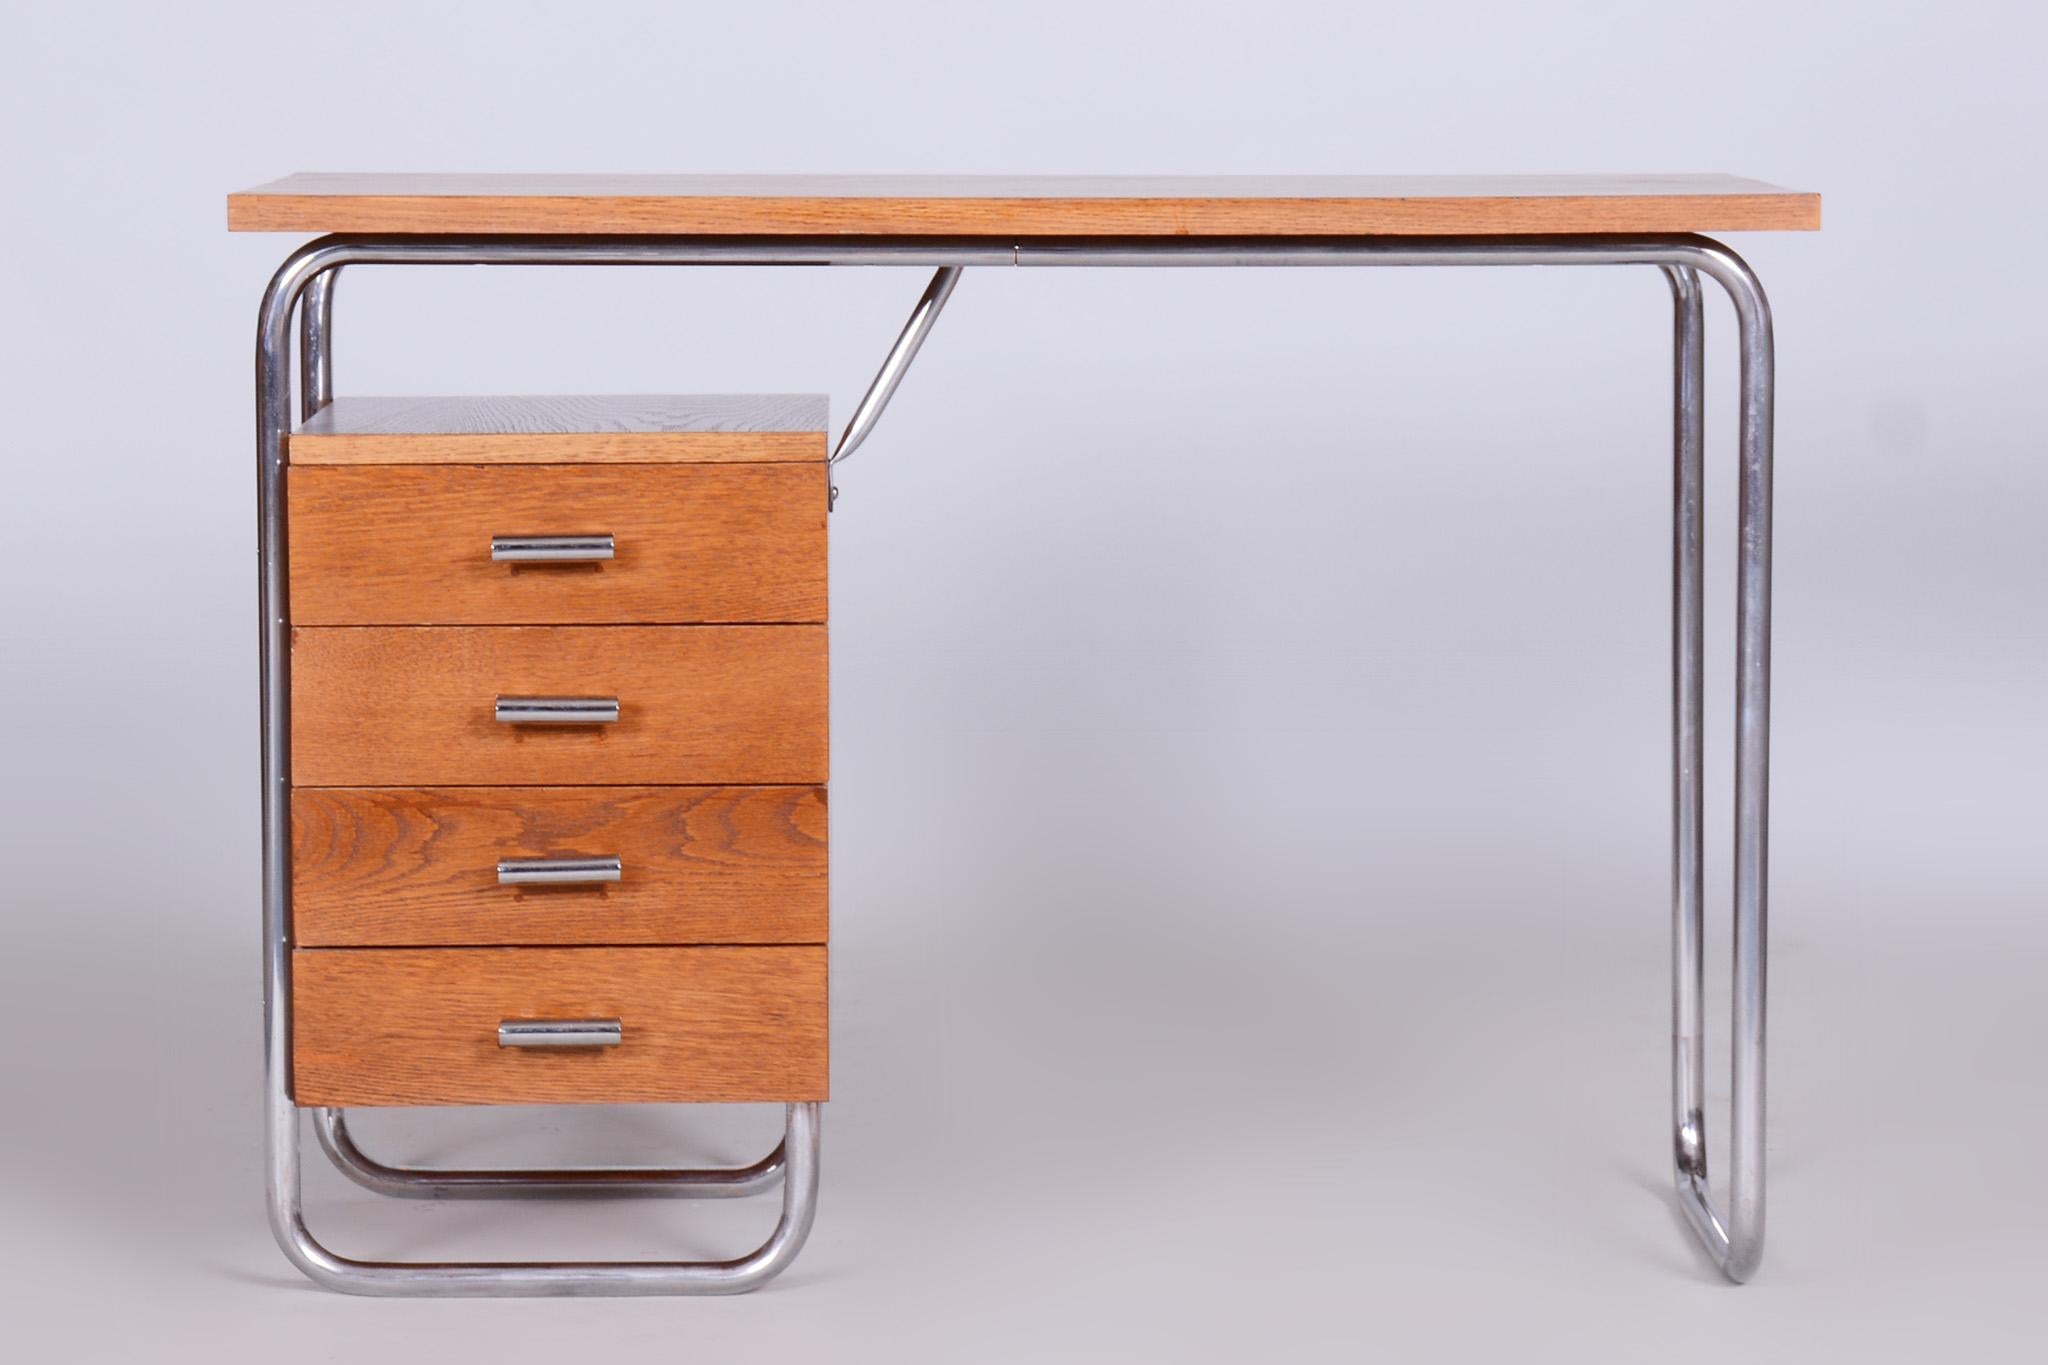 Restored writing desk with a frame in tubular chromed steel.

Designed by Robert Slezak in the 1930s.
Material: Oak, chrome-plated steel.

Wood is completely restored. 
Tubular steel with original chrome plating and patina. Fully cleaned.